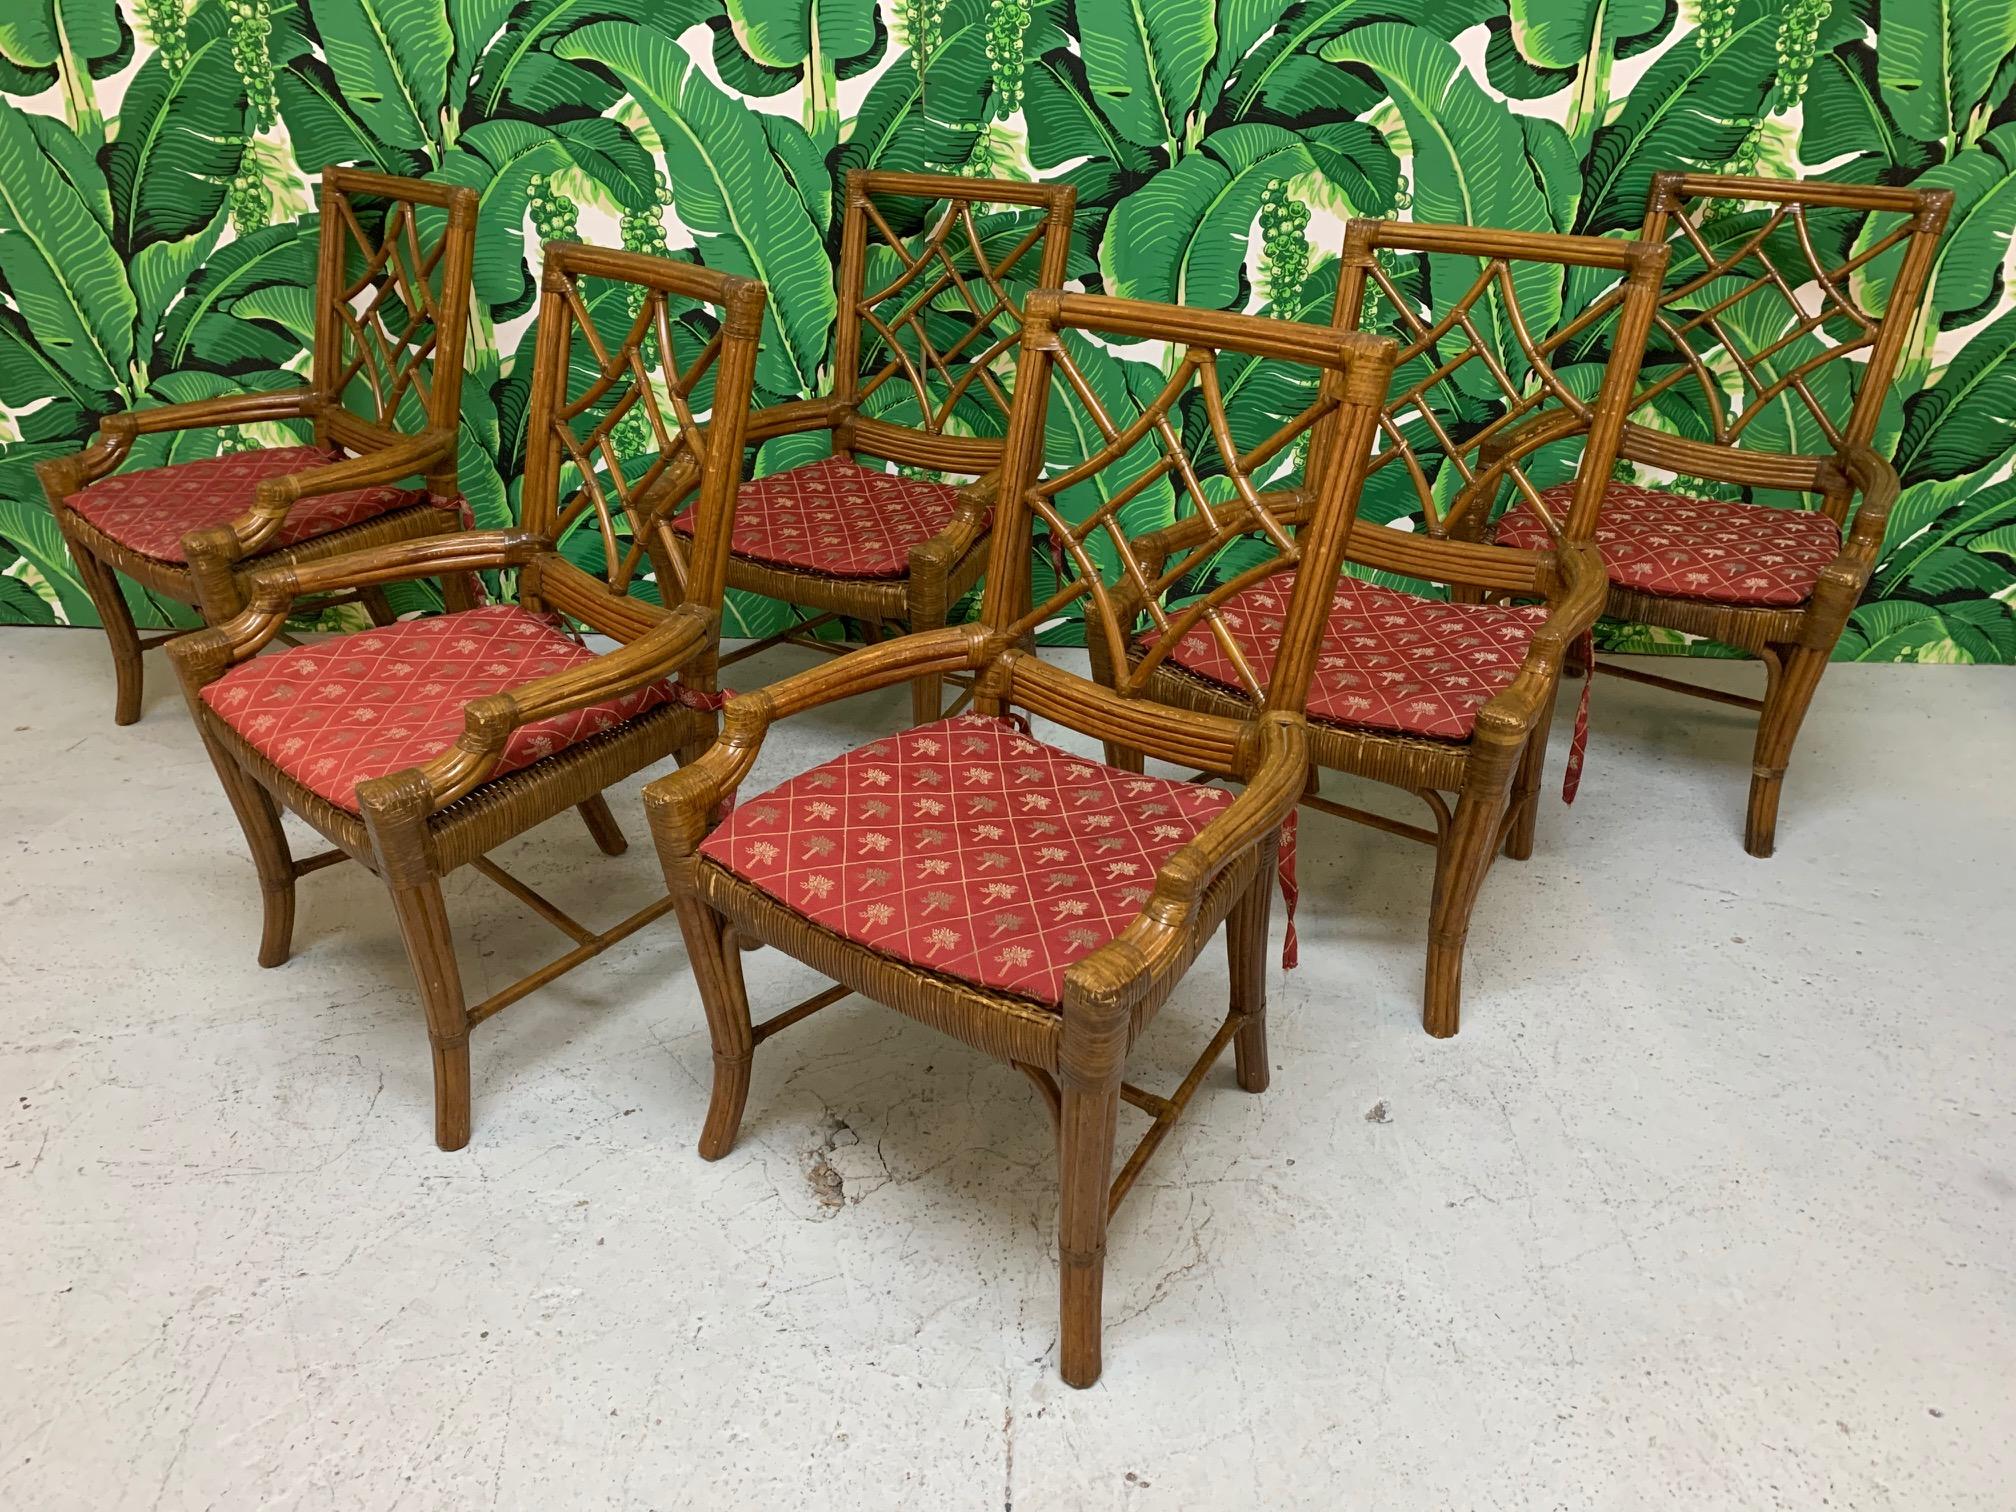 Set of 6 faux bamboo rattan dining chairs in Asian chinoiserie style. Wicker seats and leather wrapped joints. Seat cushions in a deep red with palm tree design. Good condition structurally and cosmetically showing some marks consistent with age and